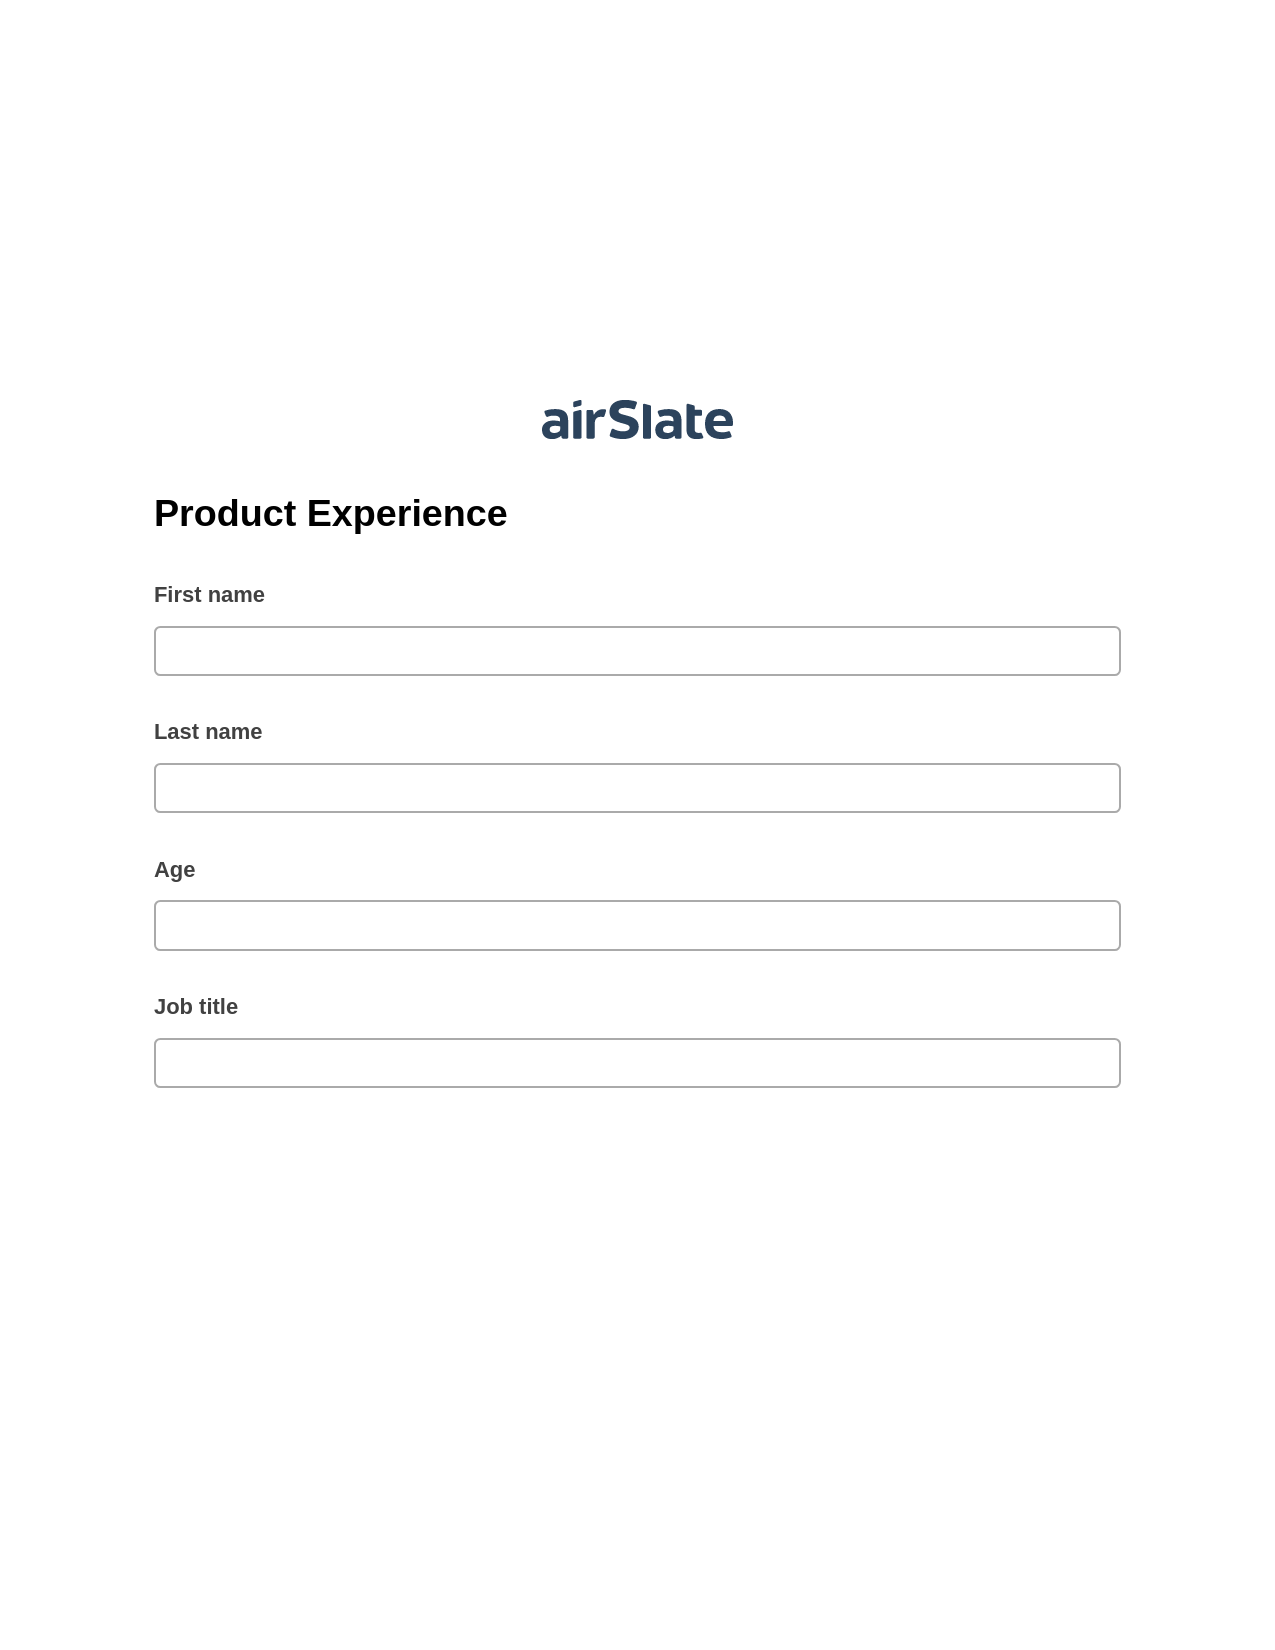 Product Experience Pre-fill from Office 365 Excel Bot, Send a Slate with Roles Bot, Export to Excel 365 Bot